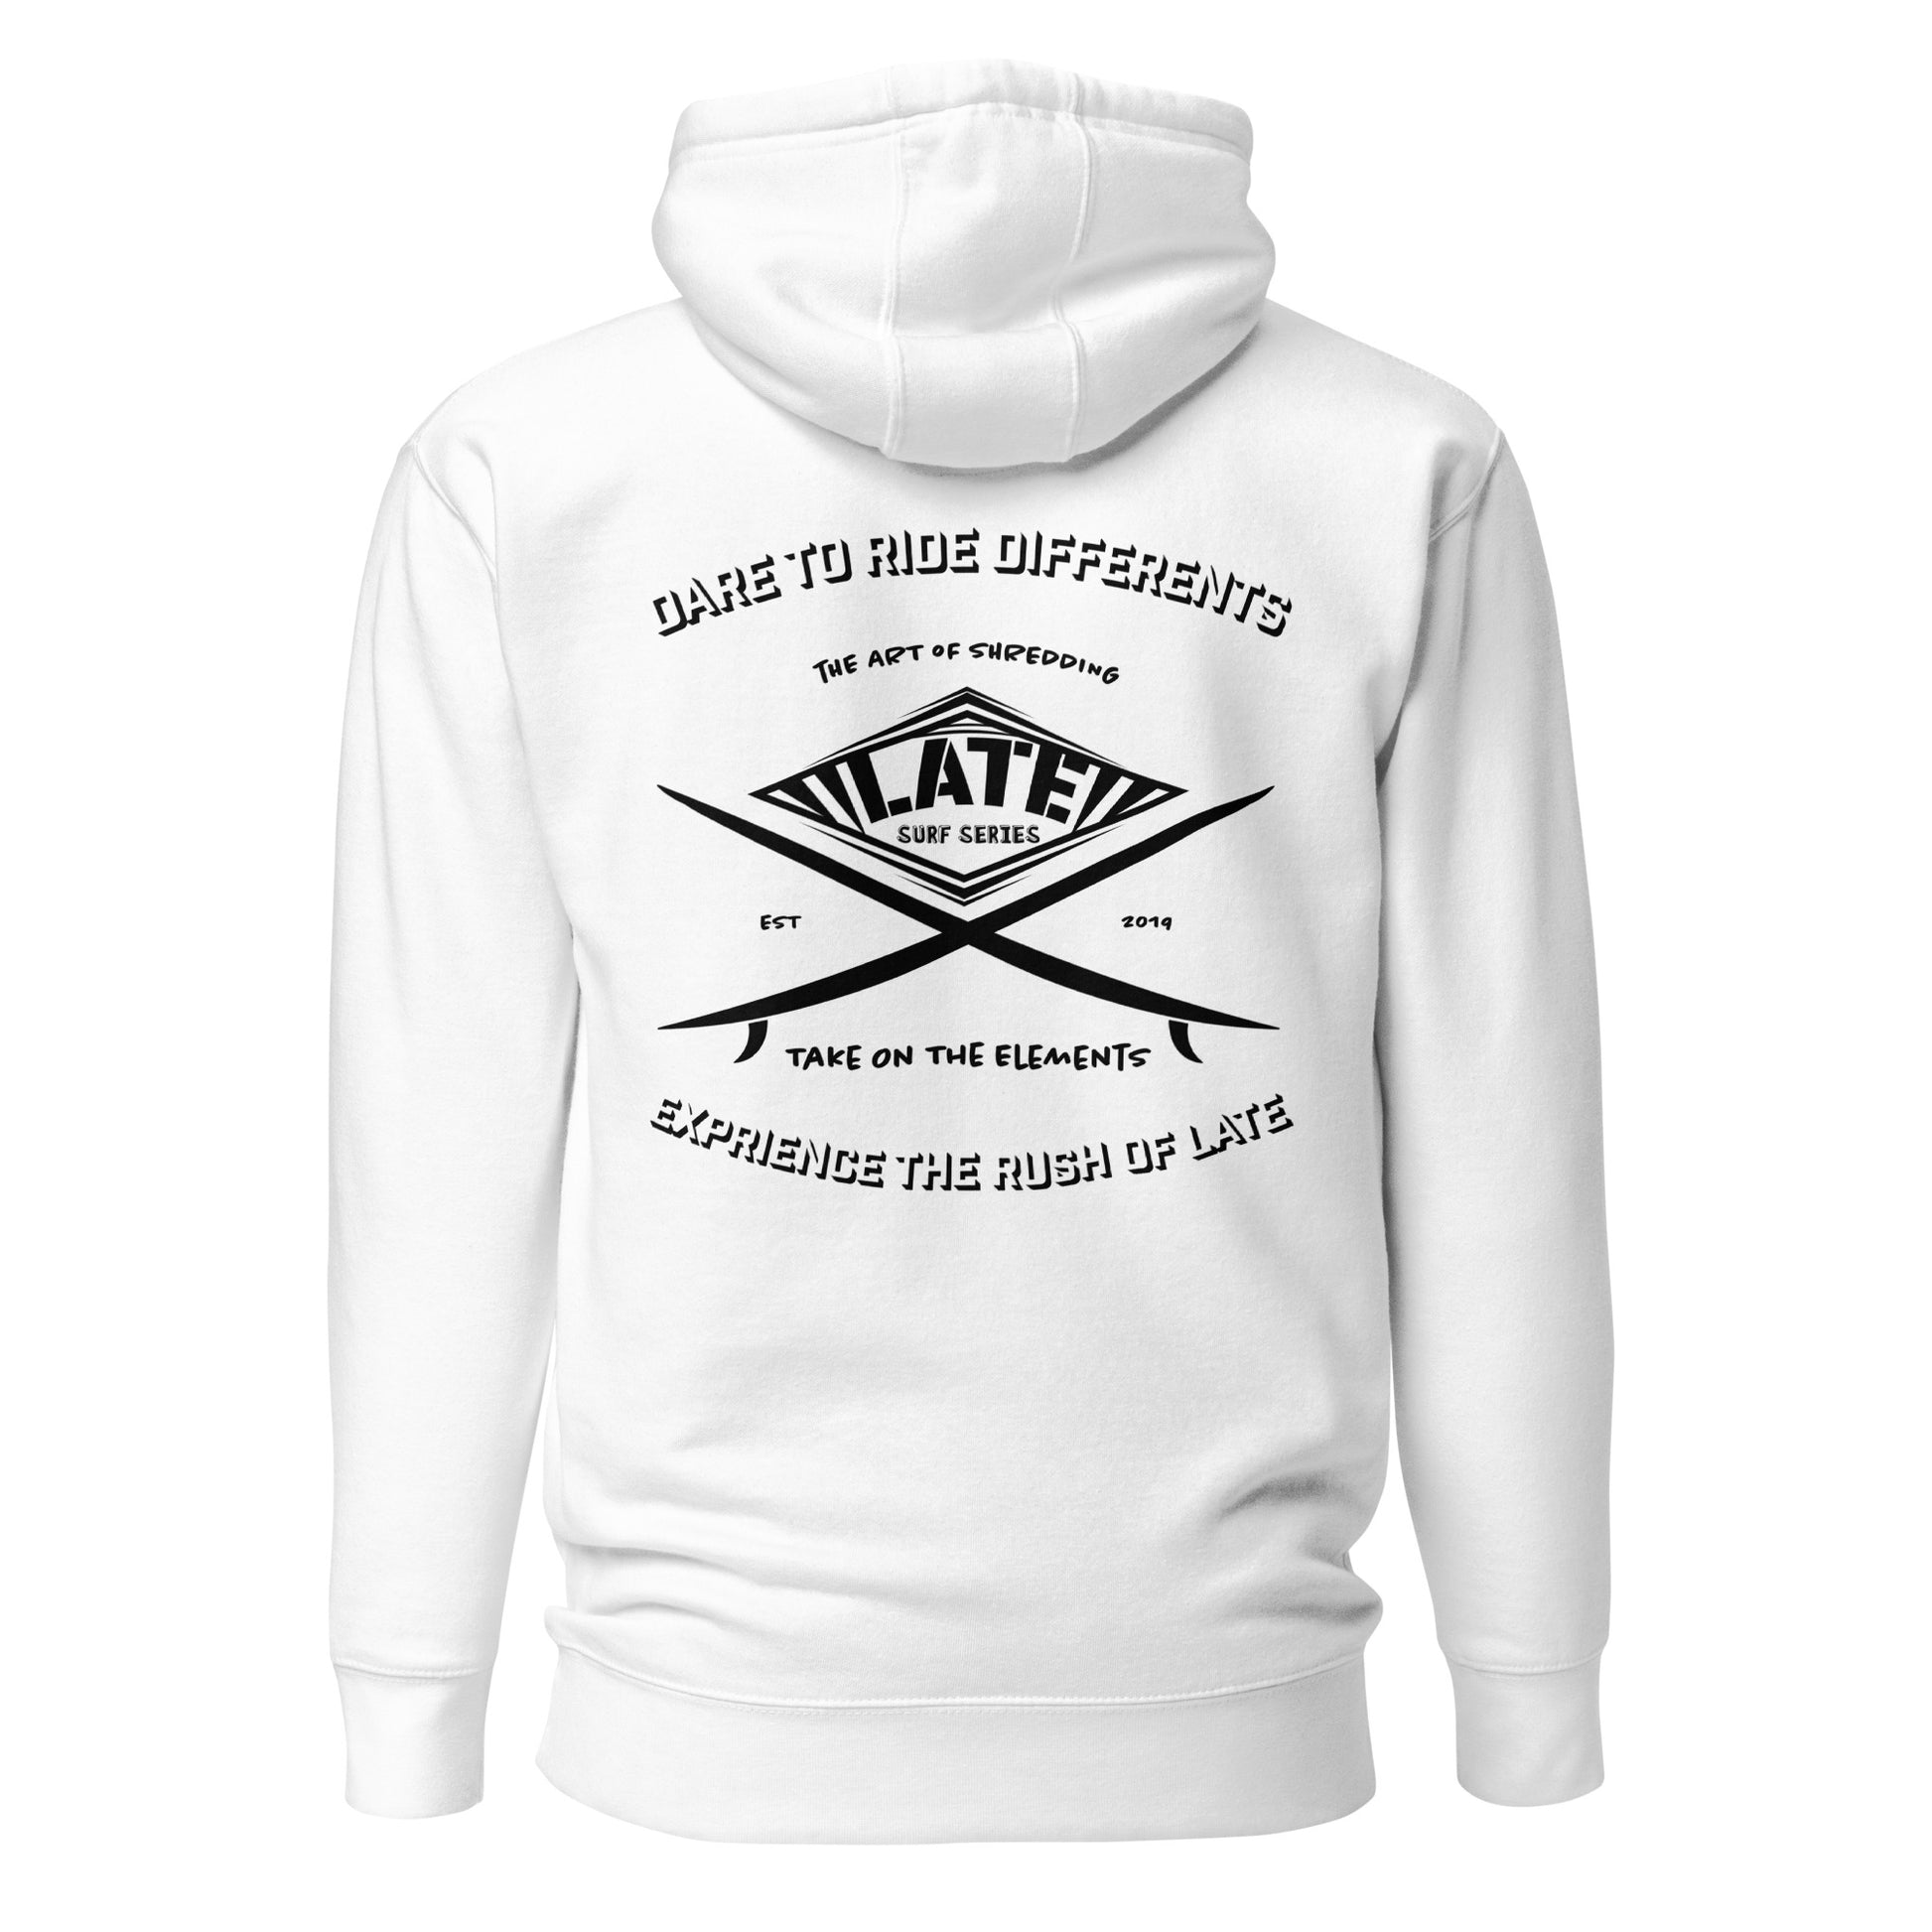 Hoodie surf blanc dare to ride differents / the art of shredding / take on the elements / Logo Late surf series